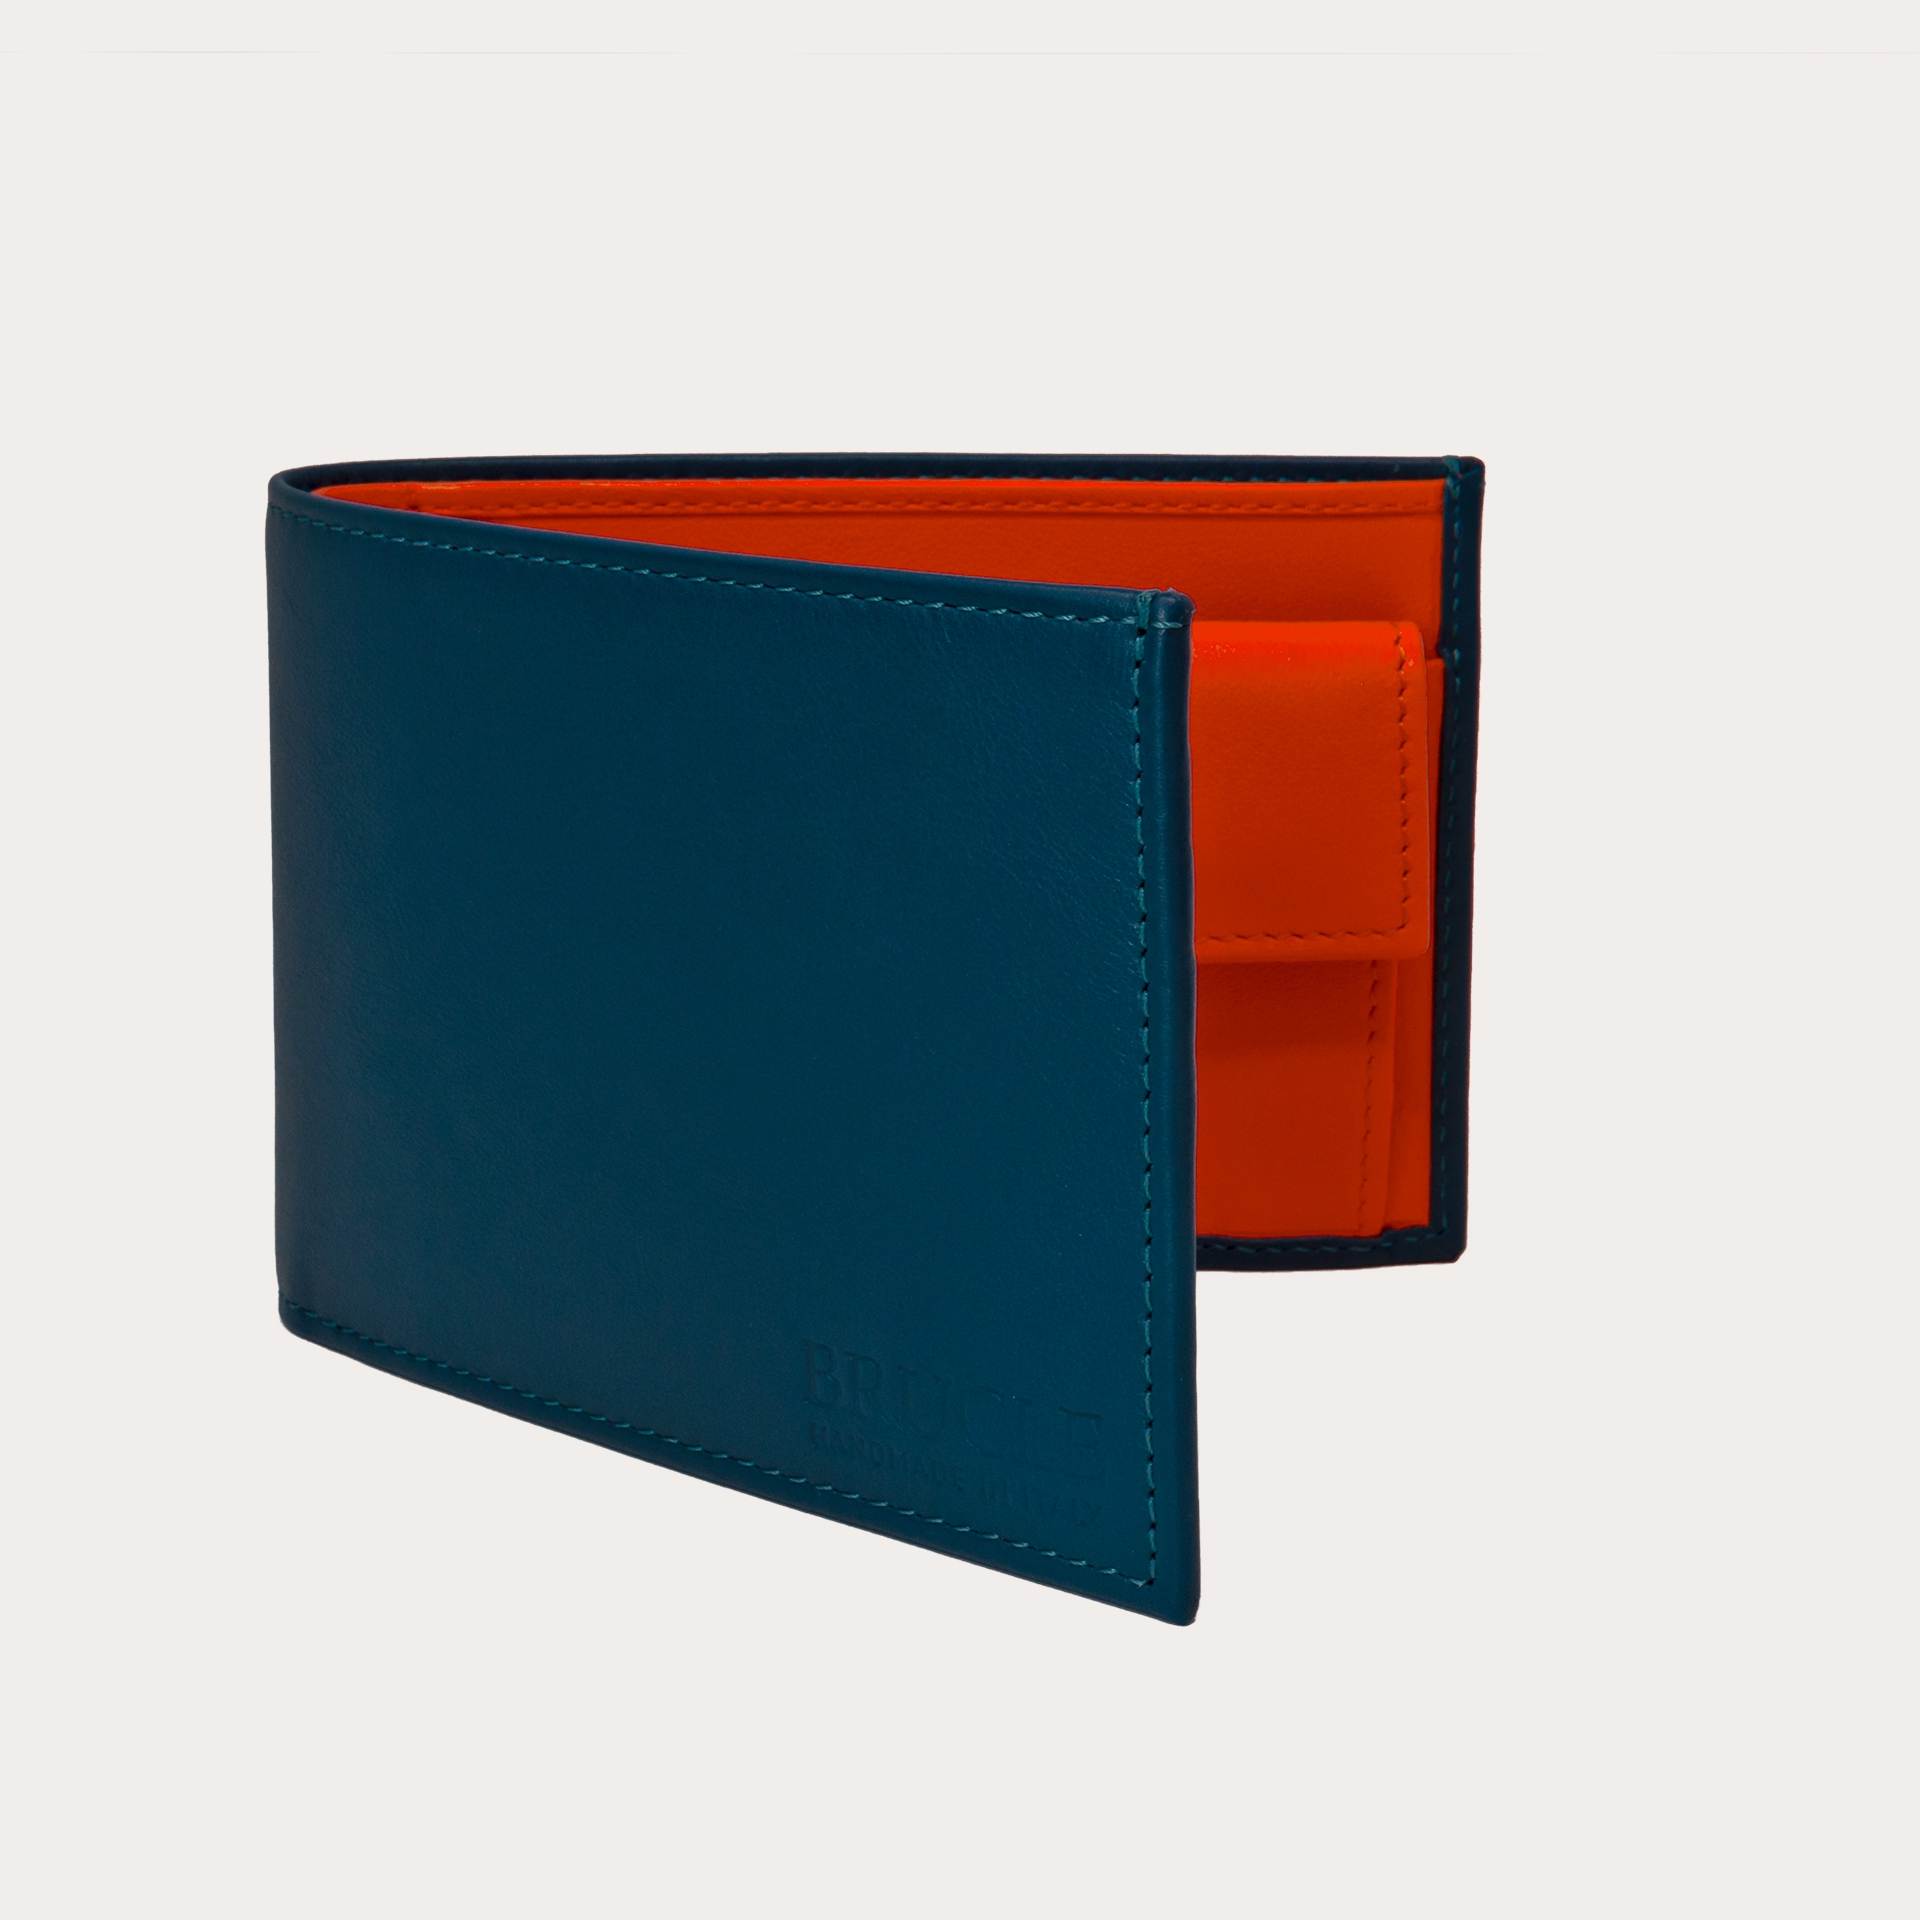 Square Gucci Mens Wallets, For Daily